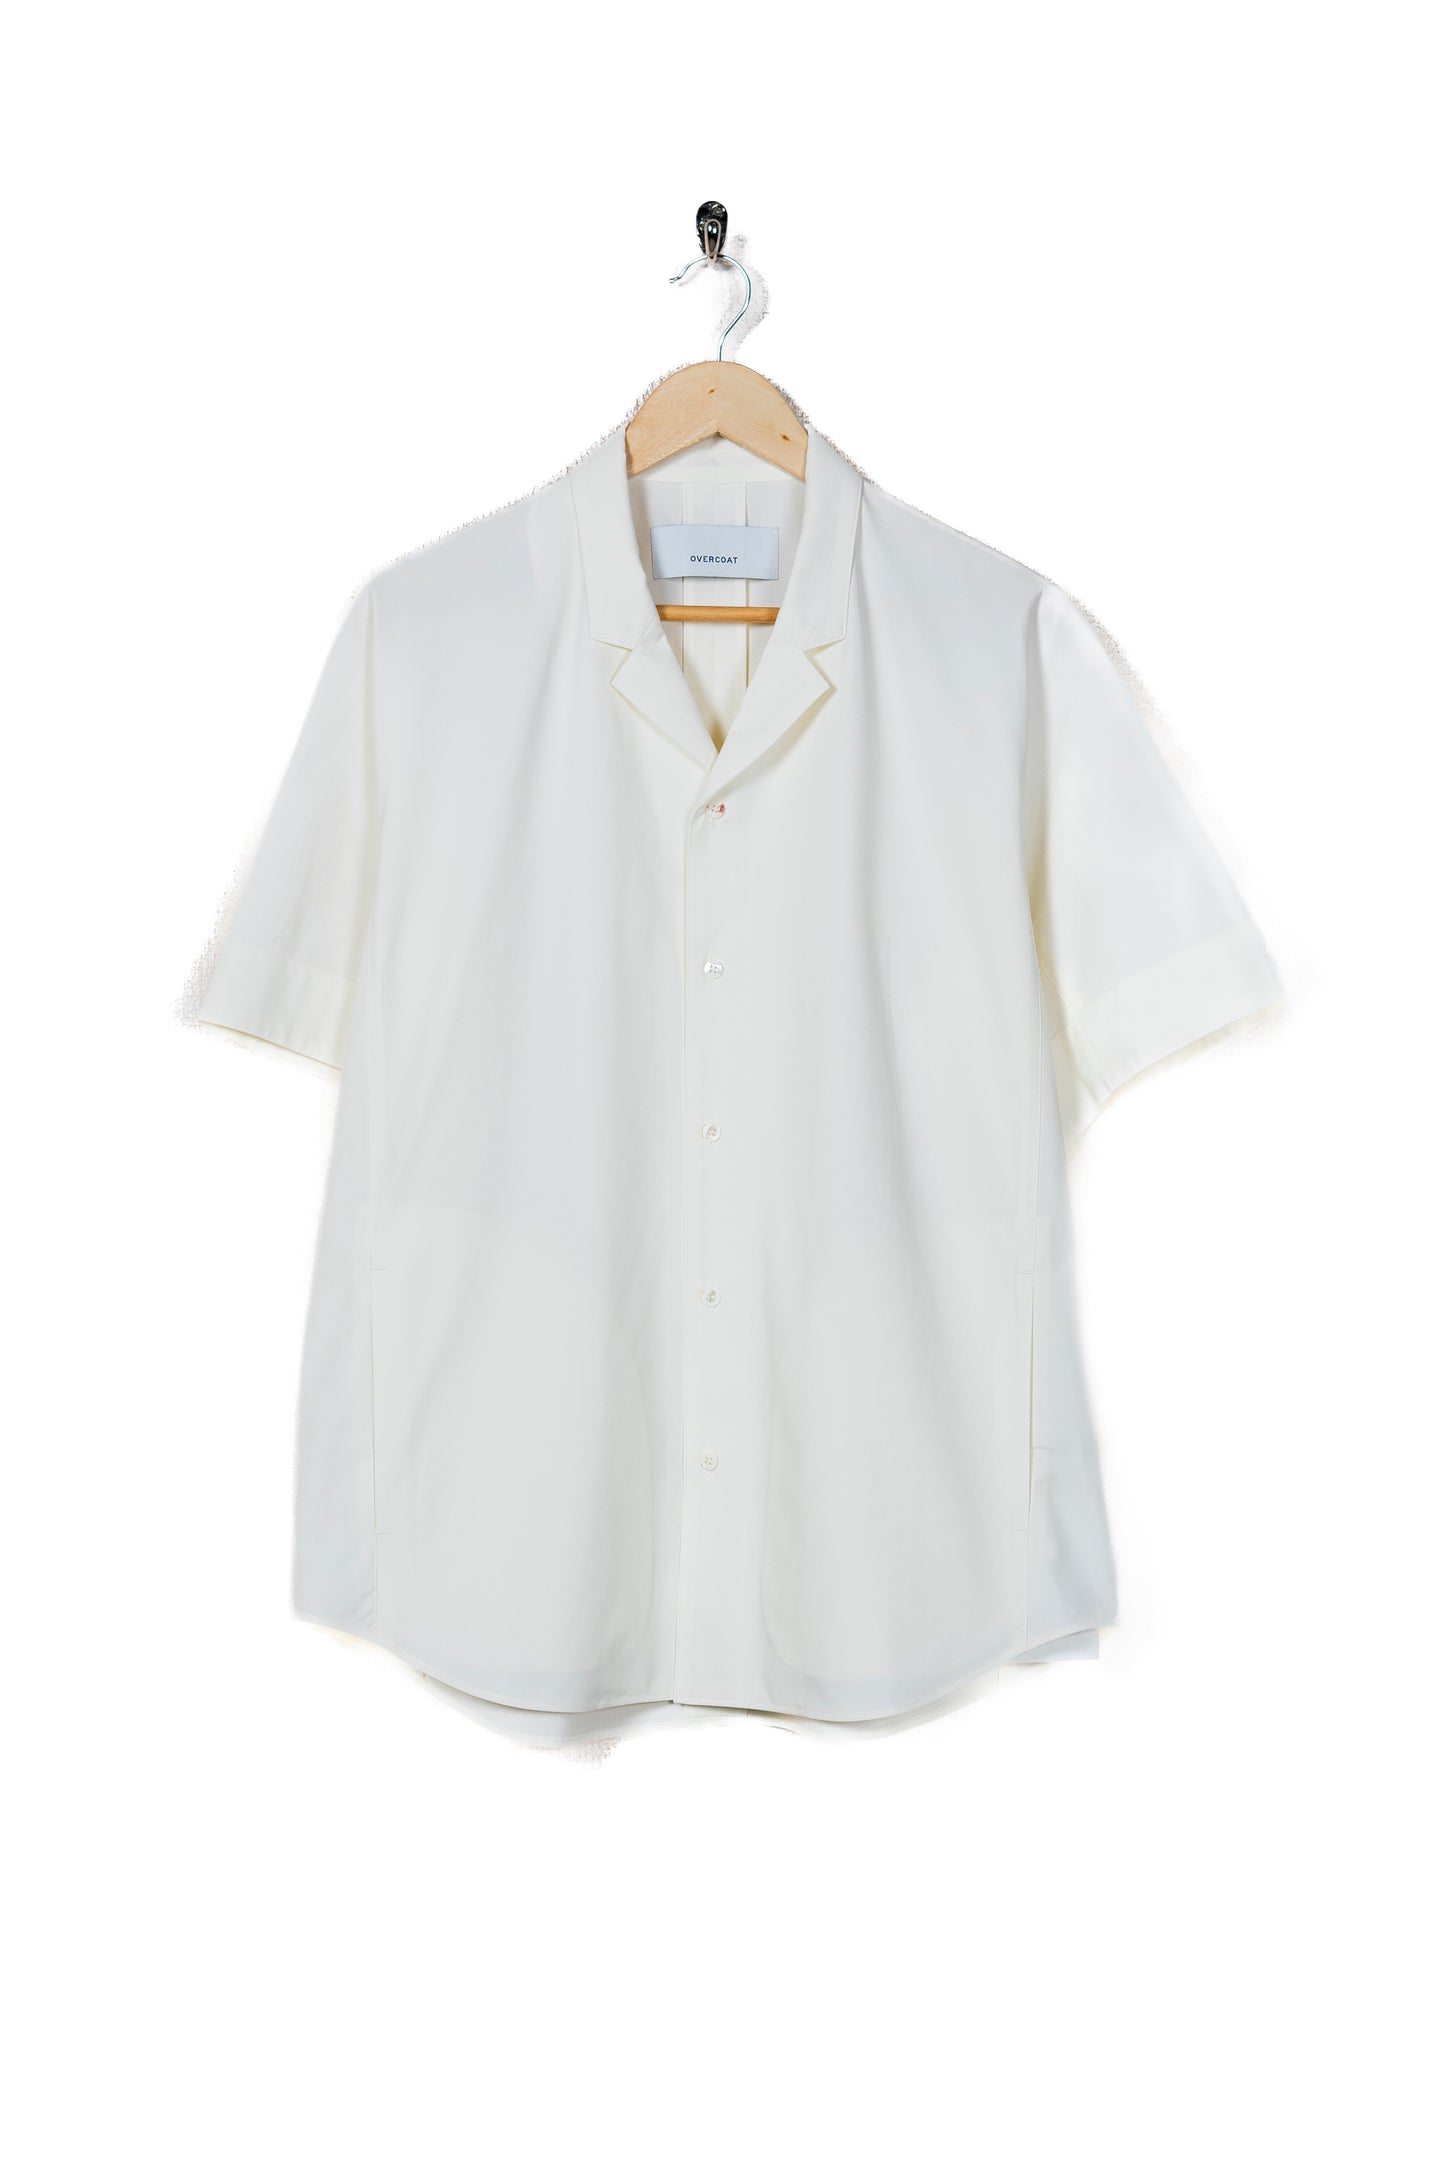 Dolman Sleeve Short Sleeve Top with Notched Collar